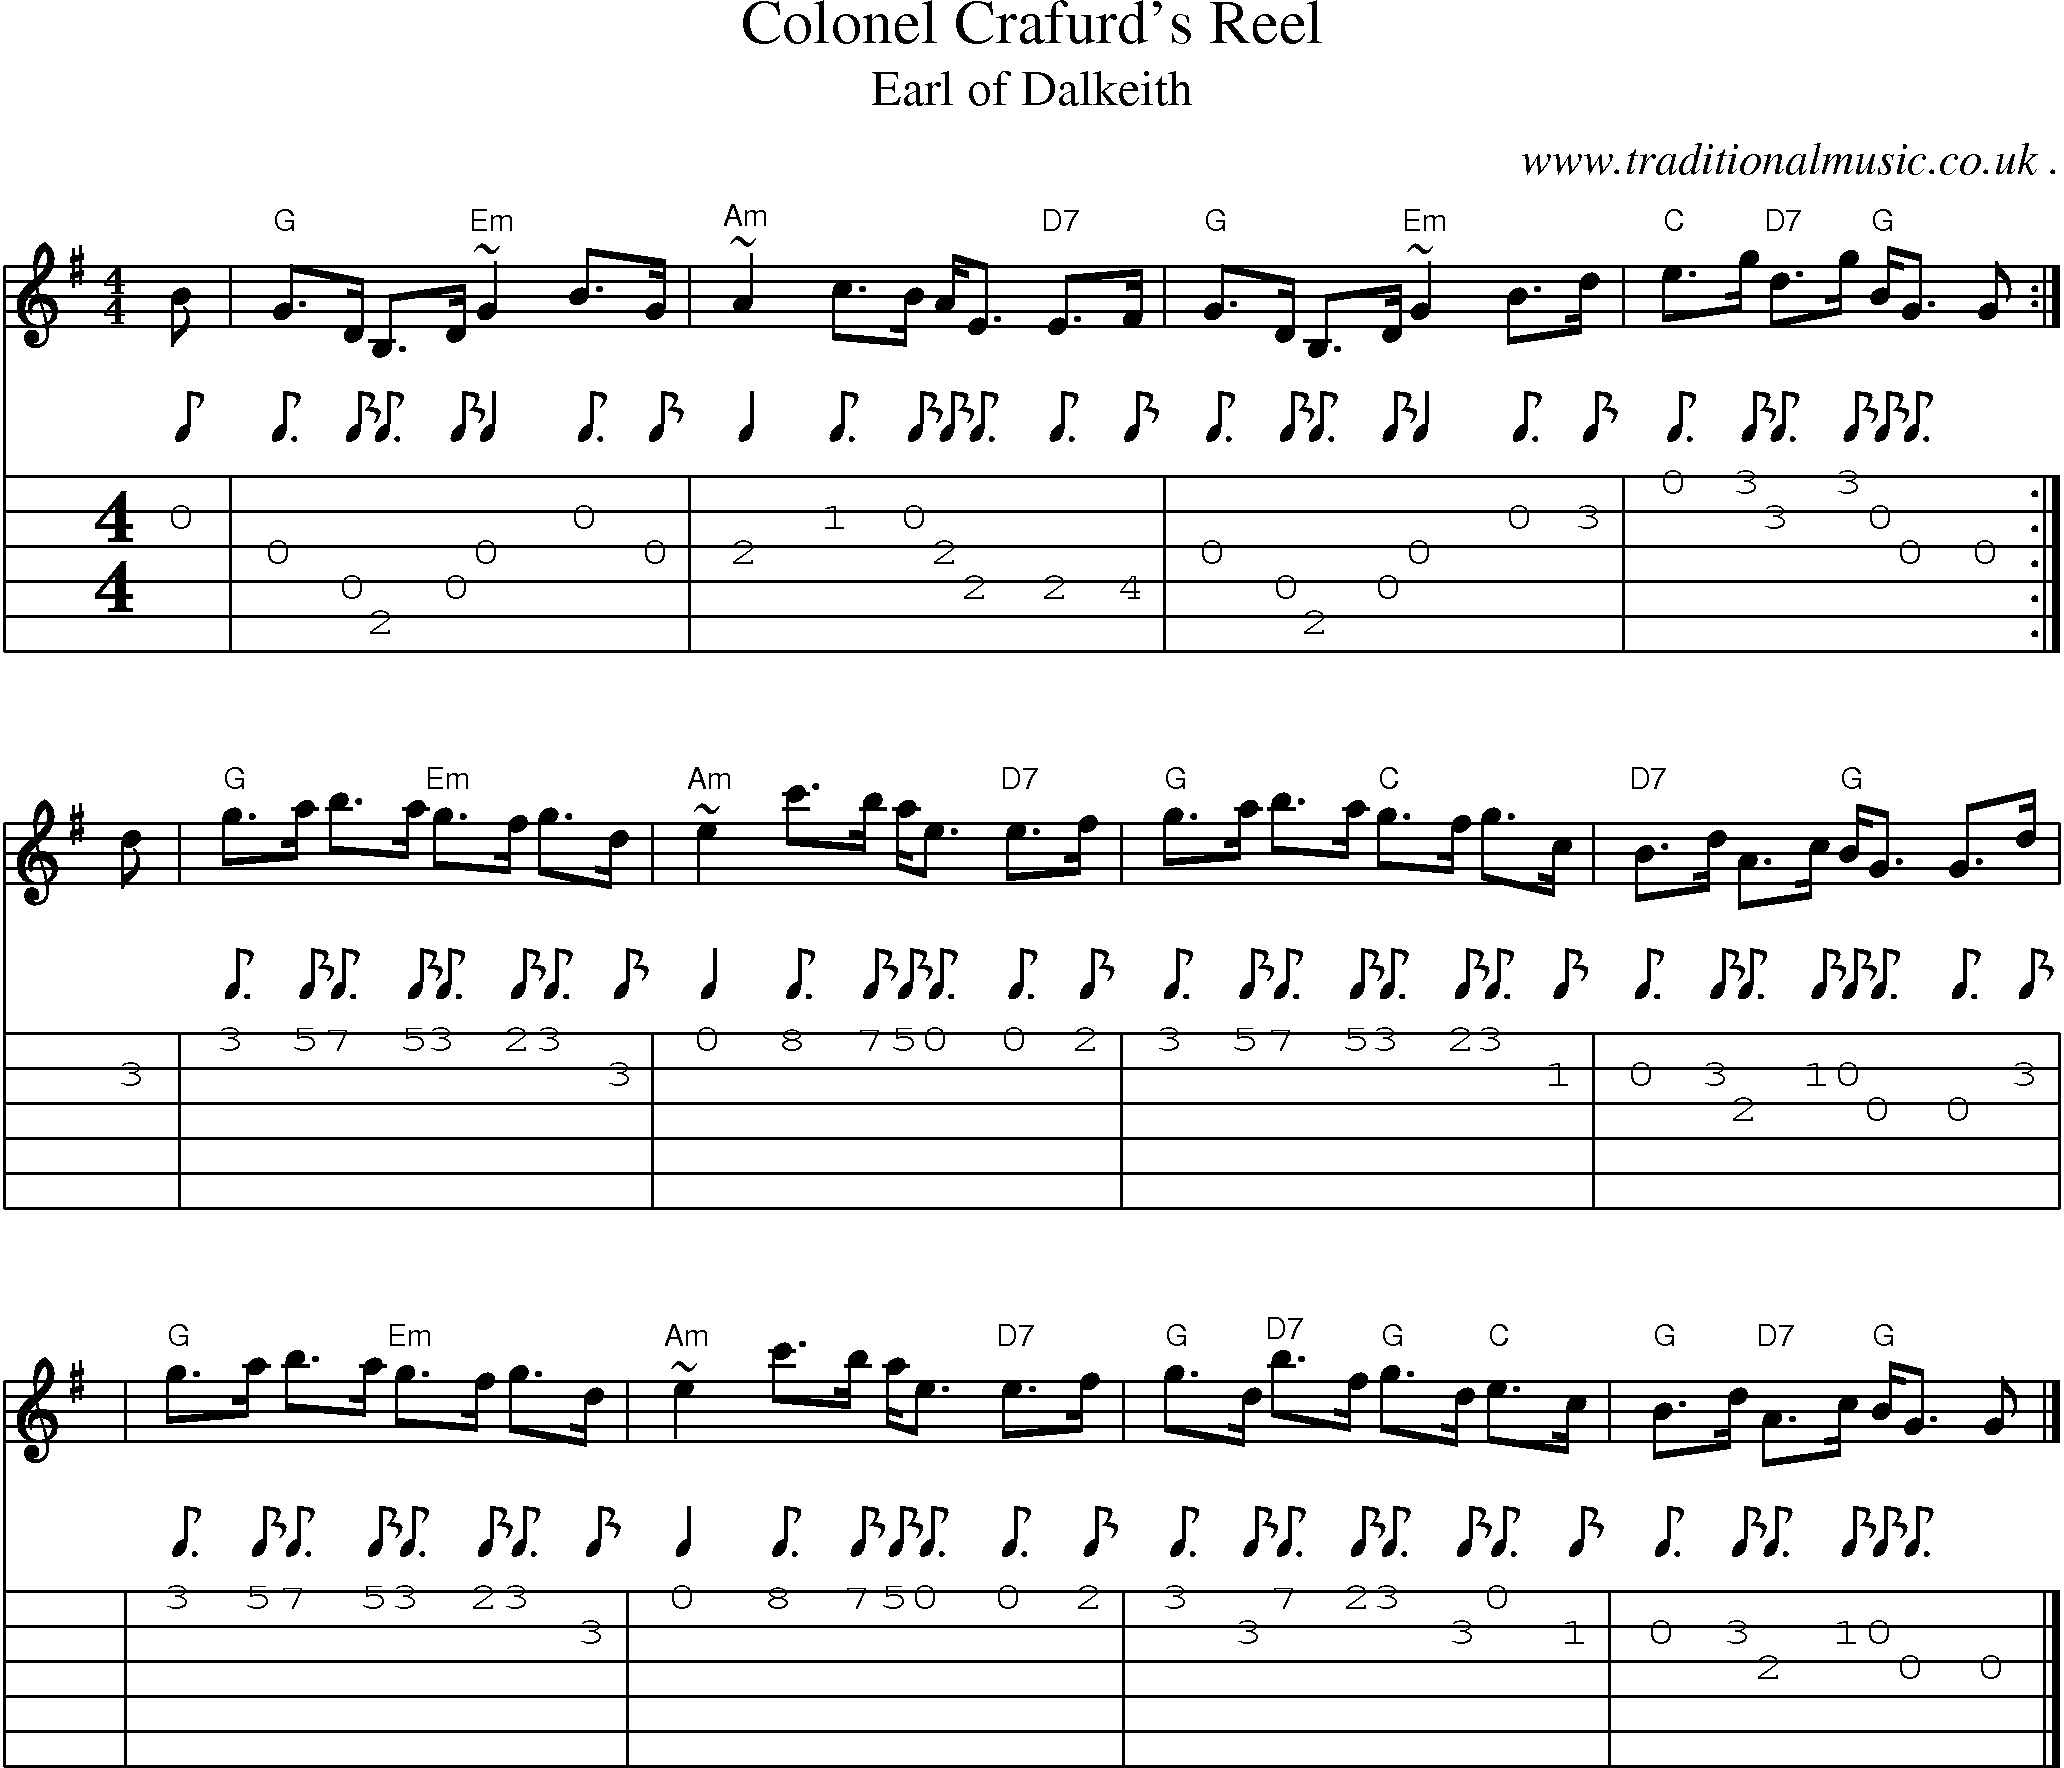 Sheet-music  score, Chords and Guitar Tabs for Colonel Crafurds Reel